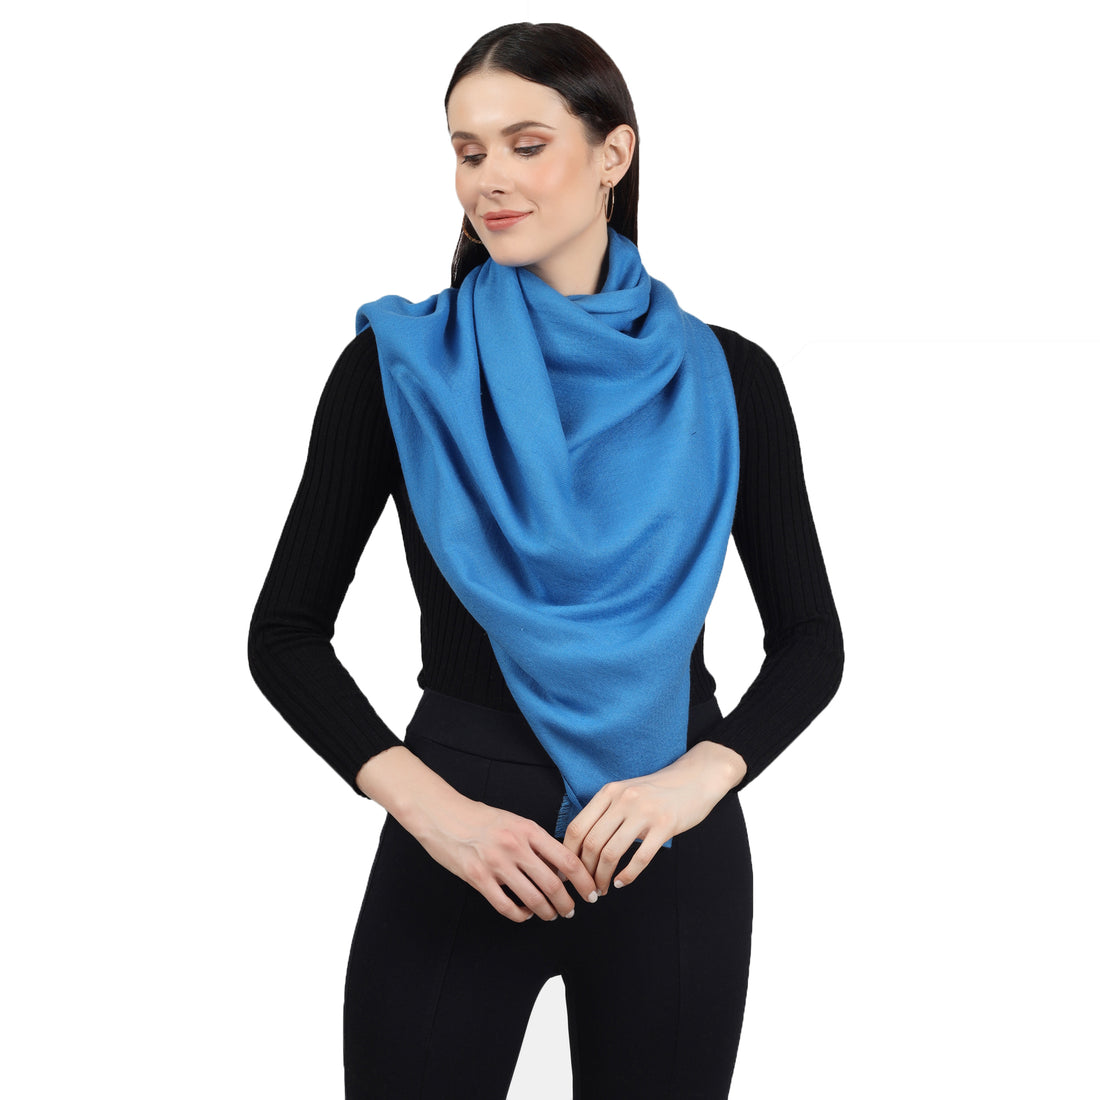 Cashmere Scarf worn by a Woman in very stylish manner around the neck